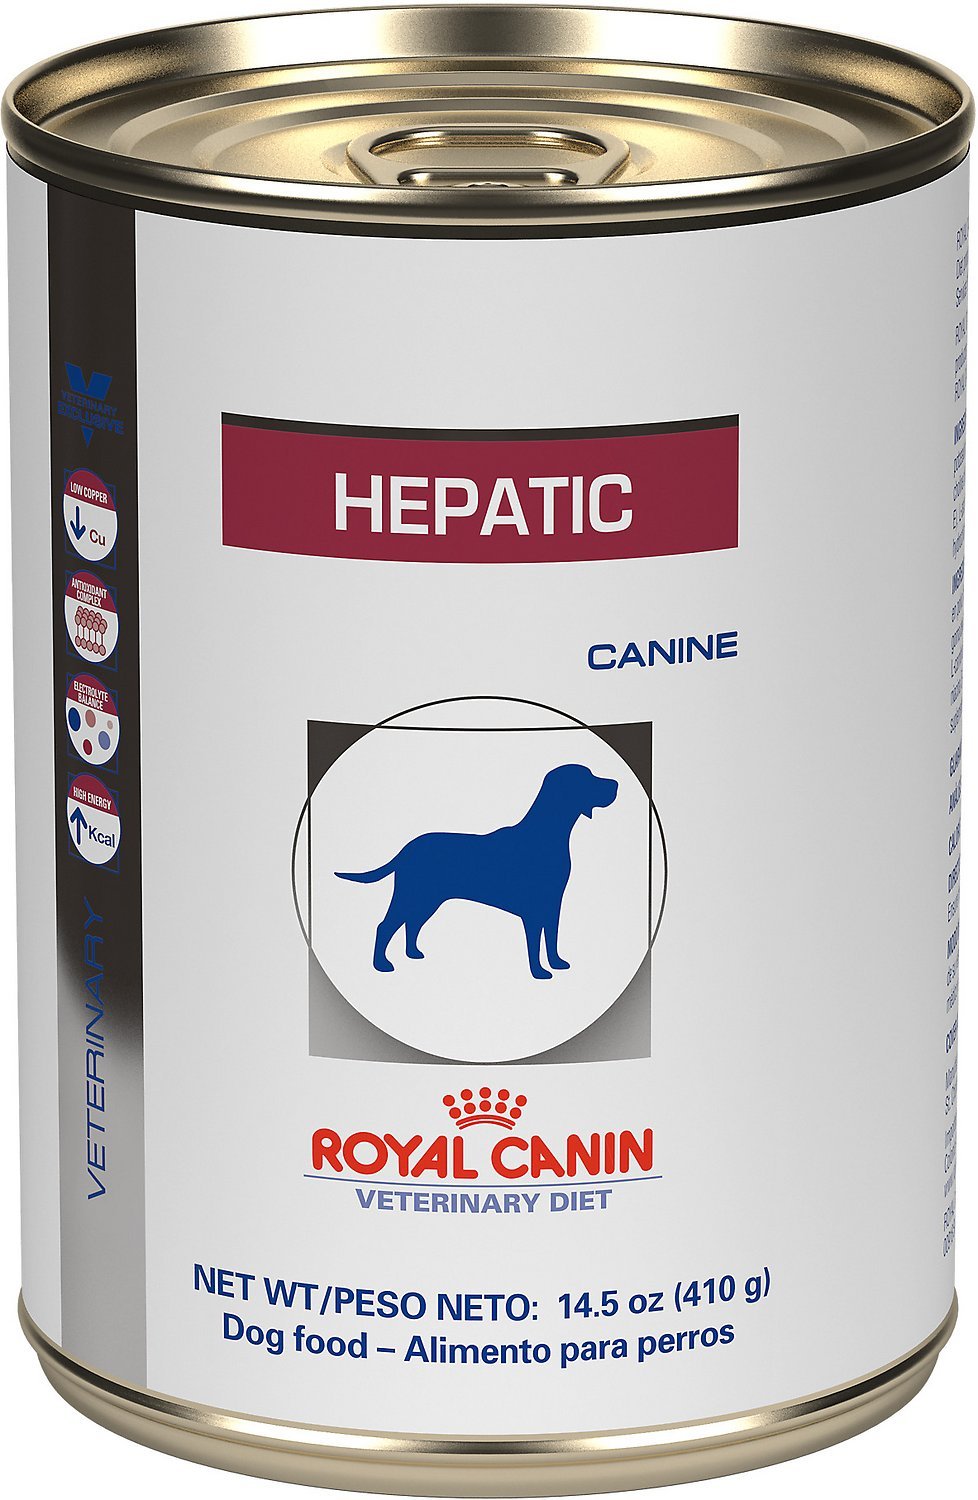 Royal Canin Veterinary Diet Hepatic Formula Canned Dog ...